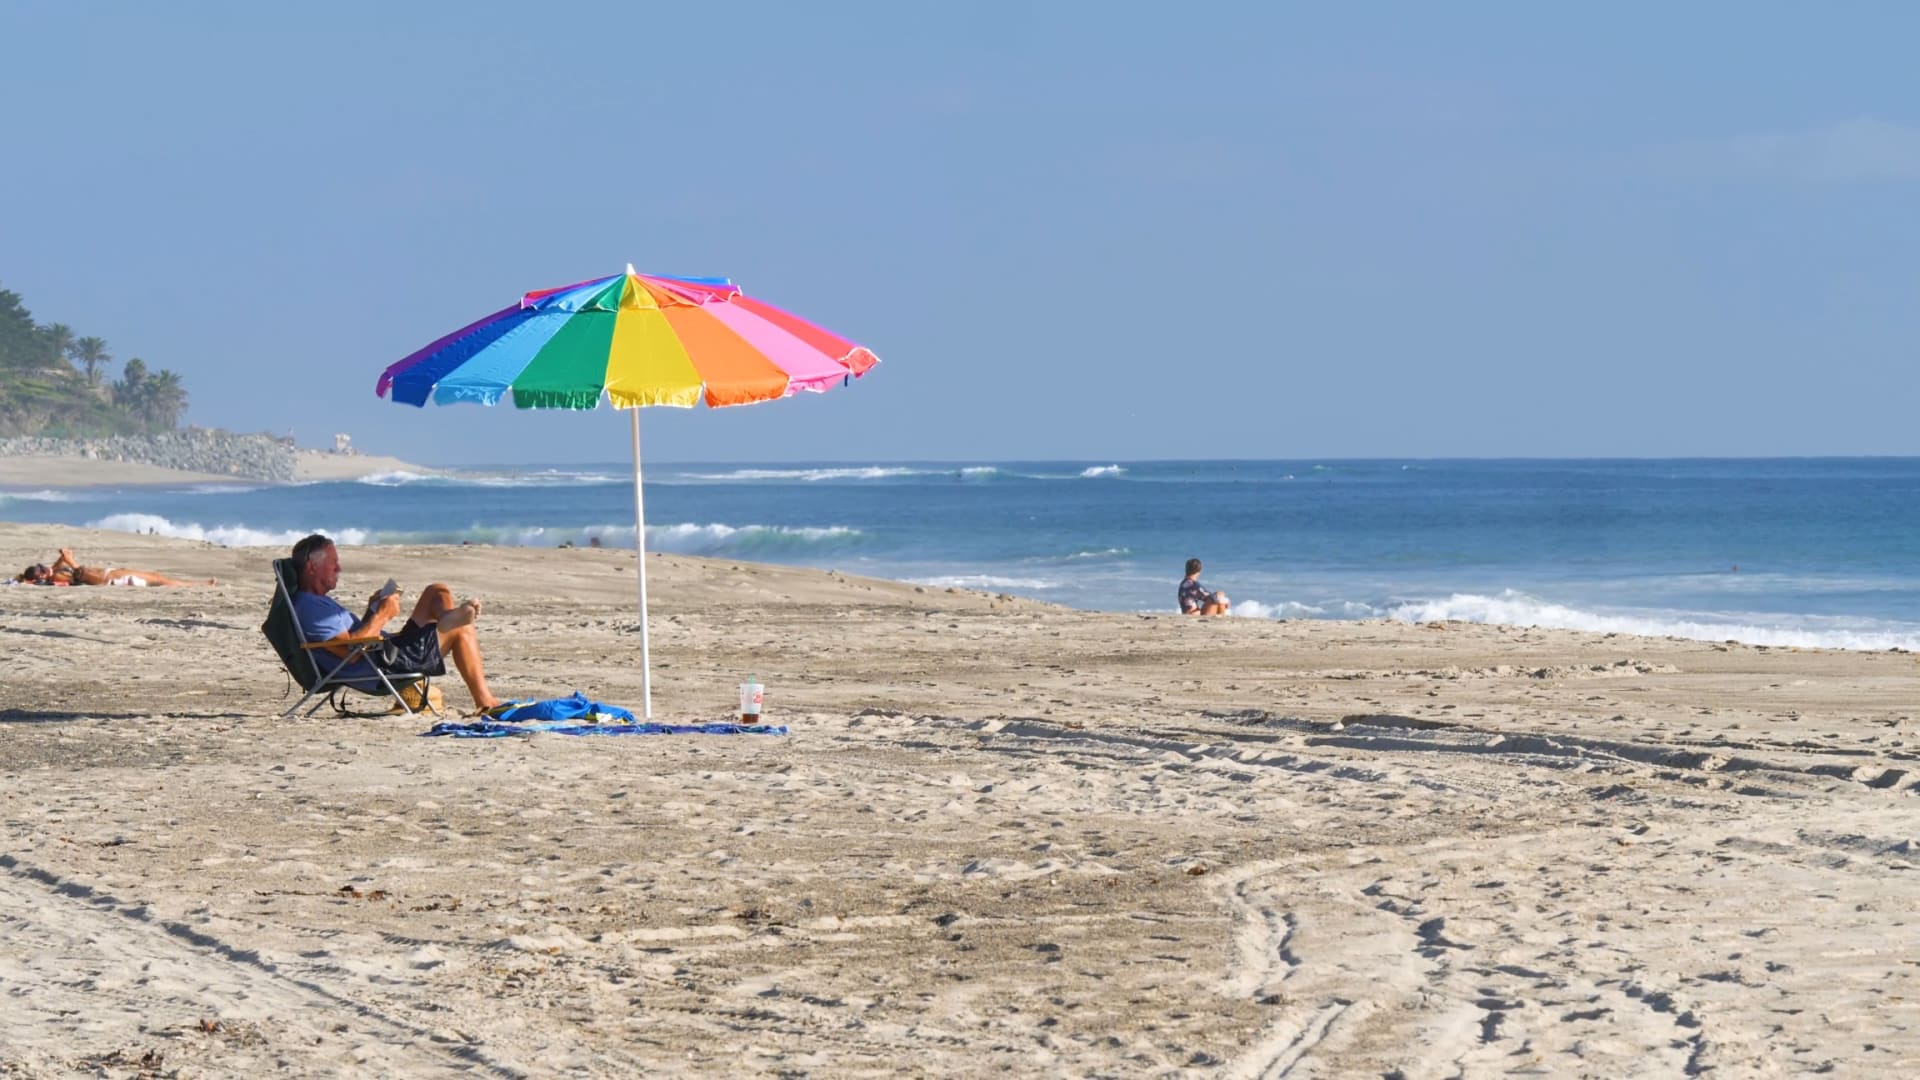 Person sitting in beach chair on the beach with a rainbow umbrella